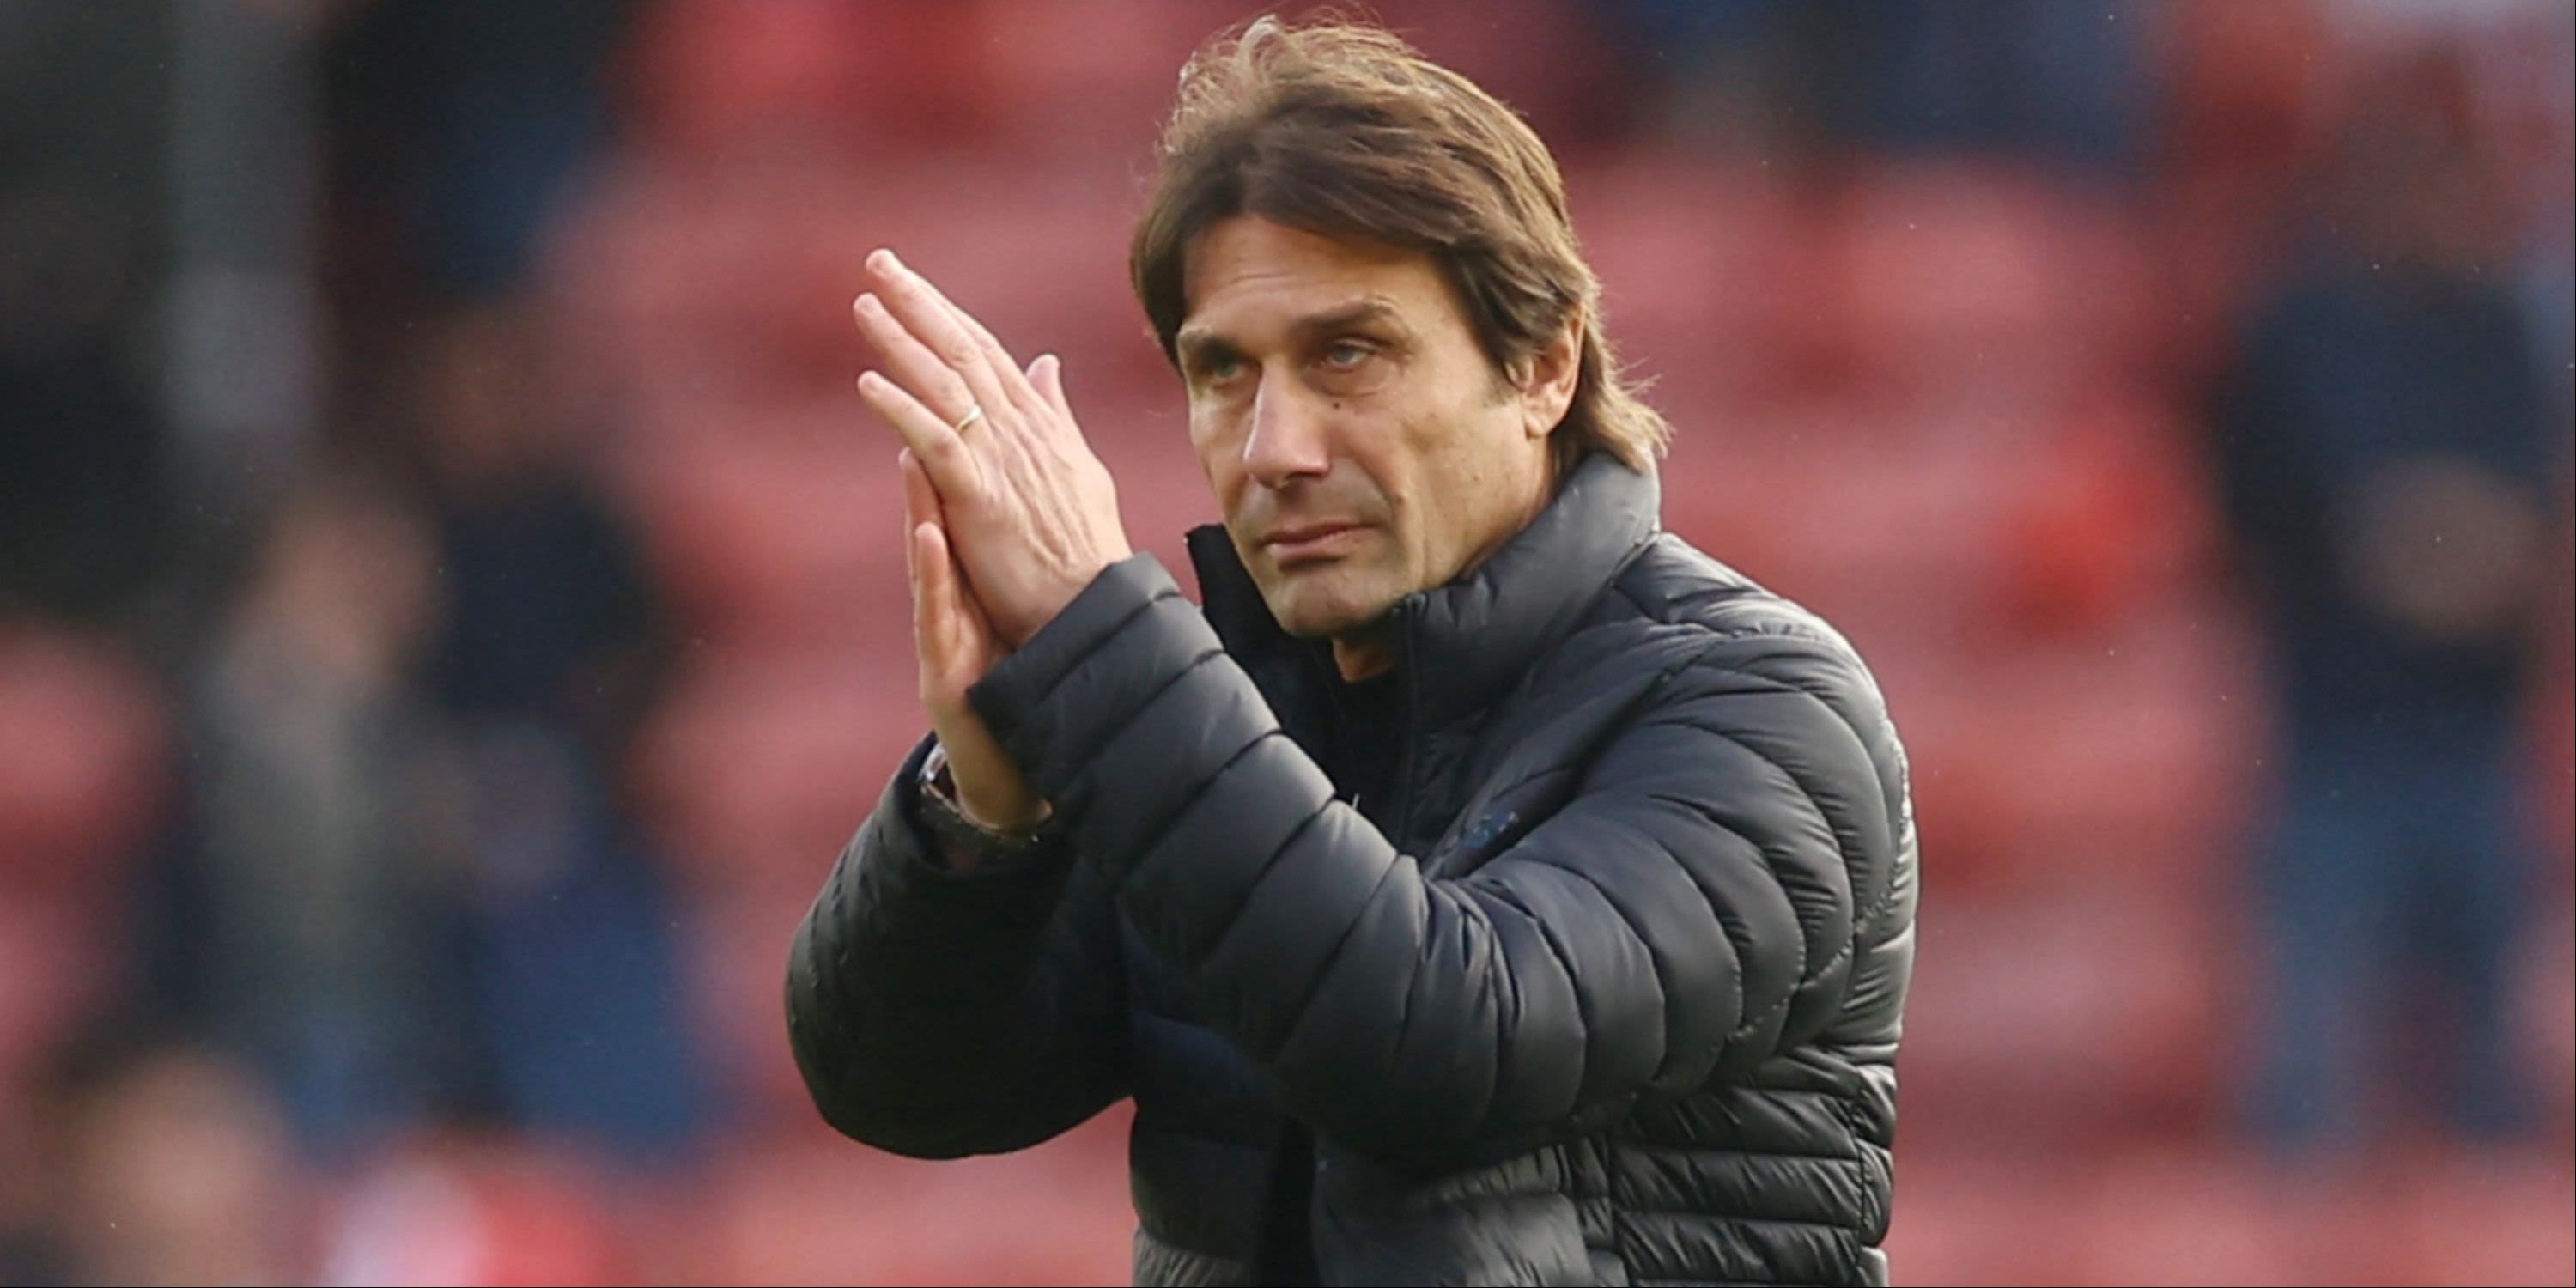 Antonio Conte Appointent Would be 'Crazy' for Chelsea